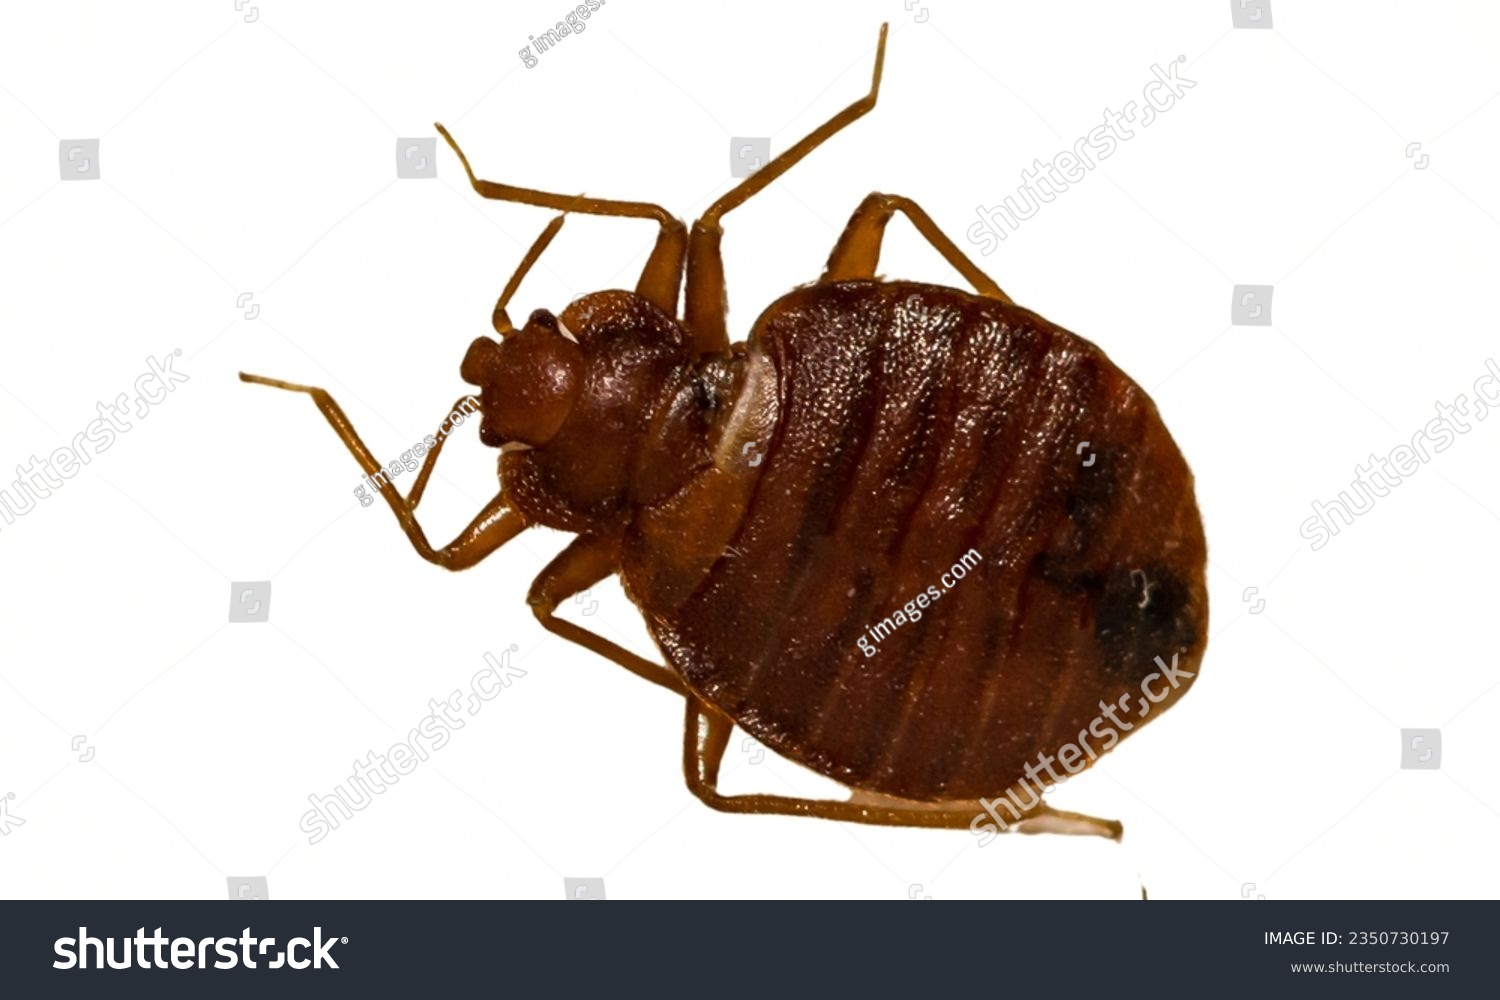 Bedbug: Infestations can lead to itchy bites and sleepless nights. #2350730197